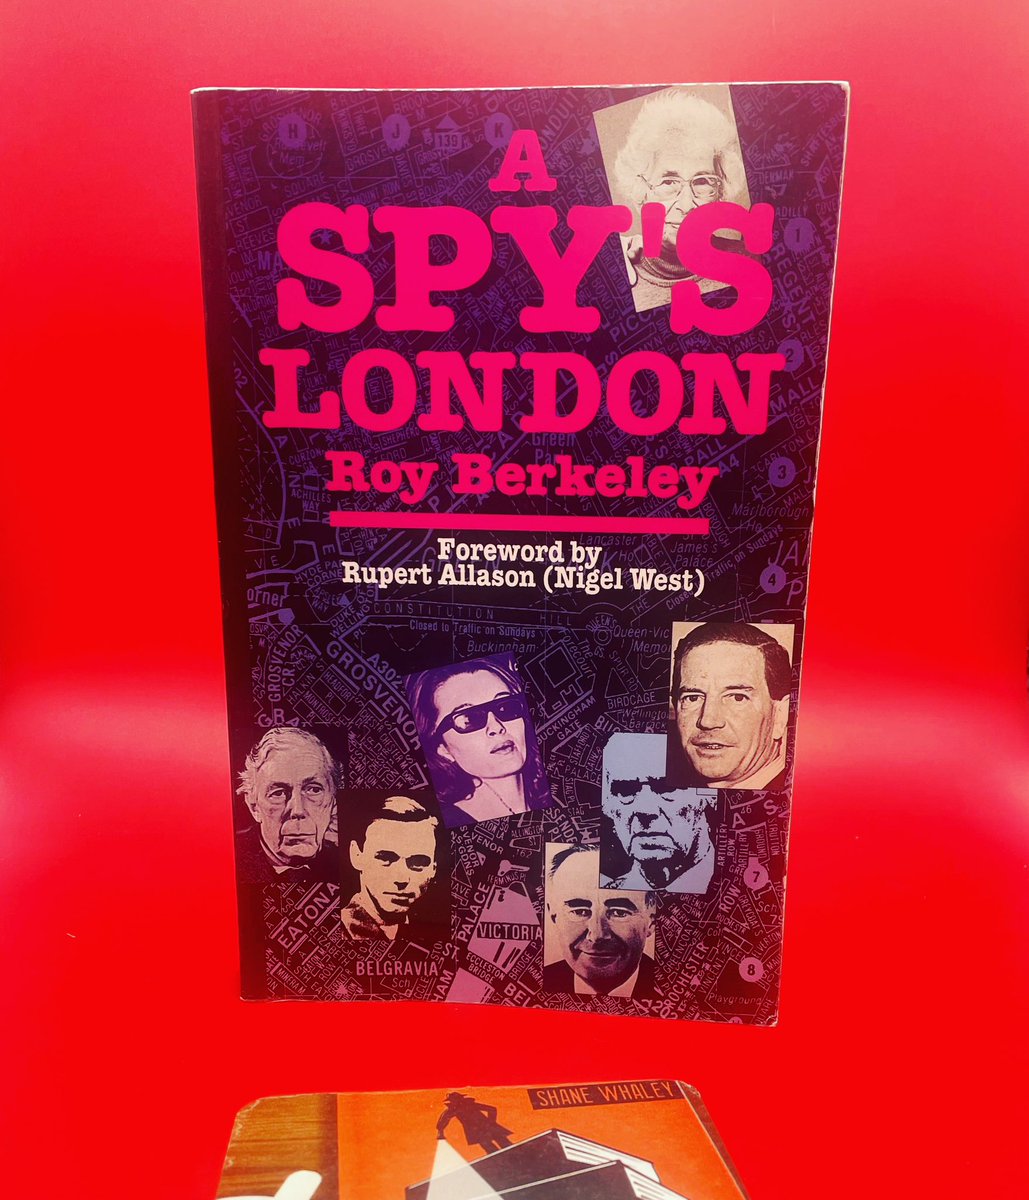 Just in time for my trip to London. This book was recommended by our recent guest, the intelligence historian Nigel West. #spies #spybrary